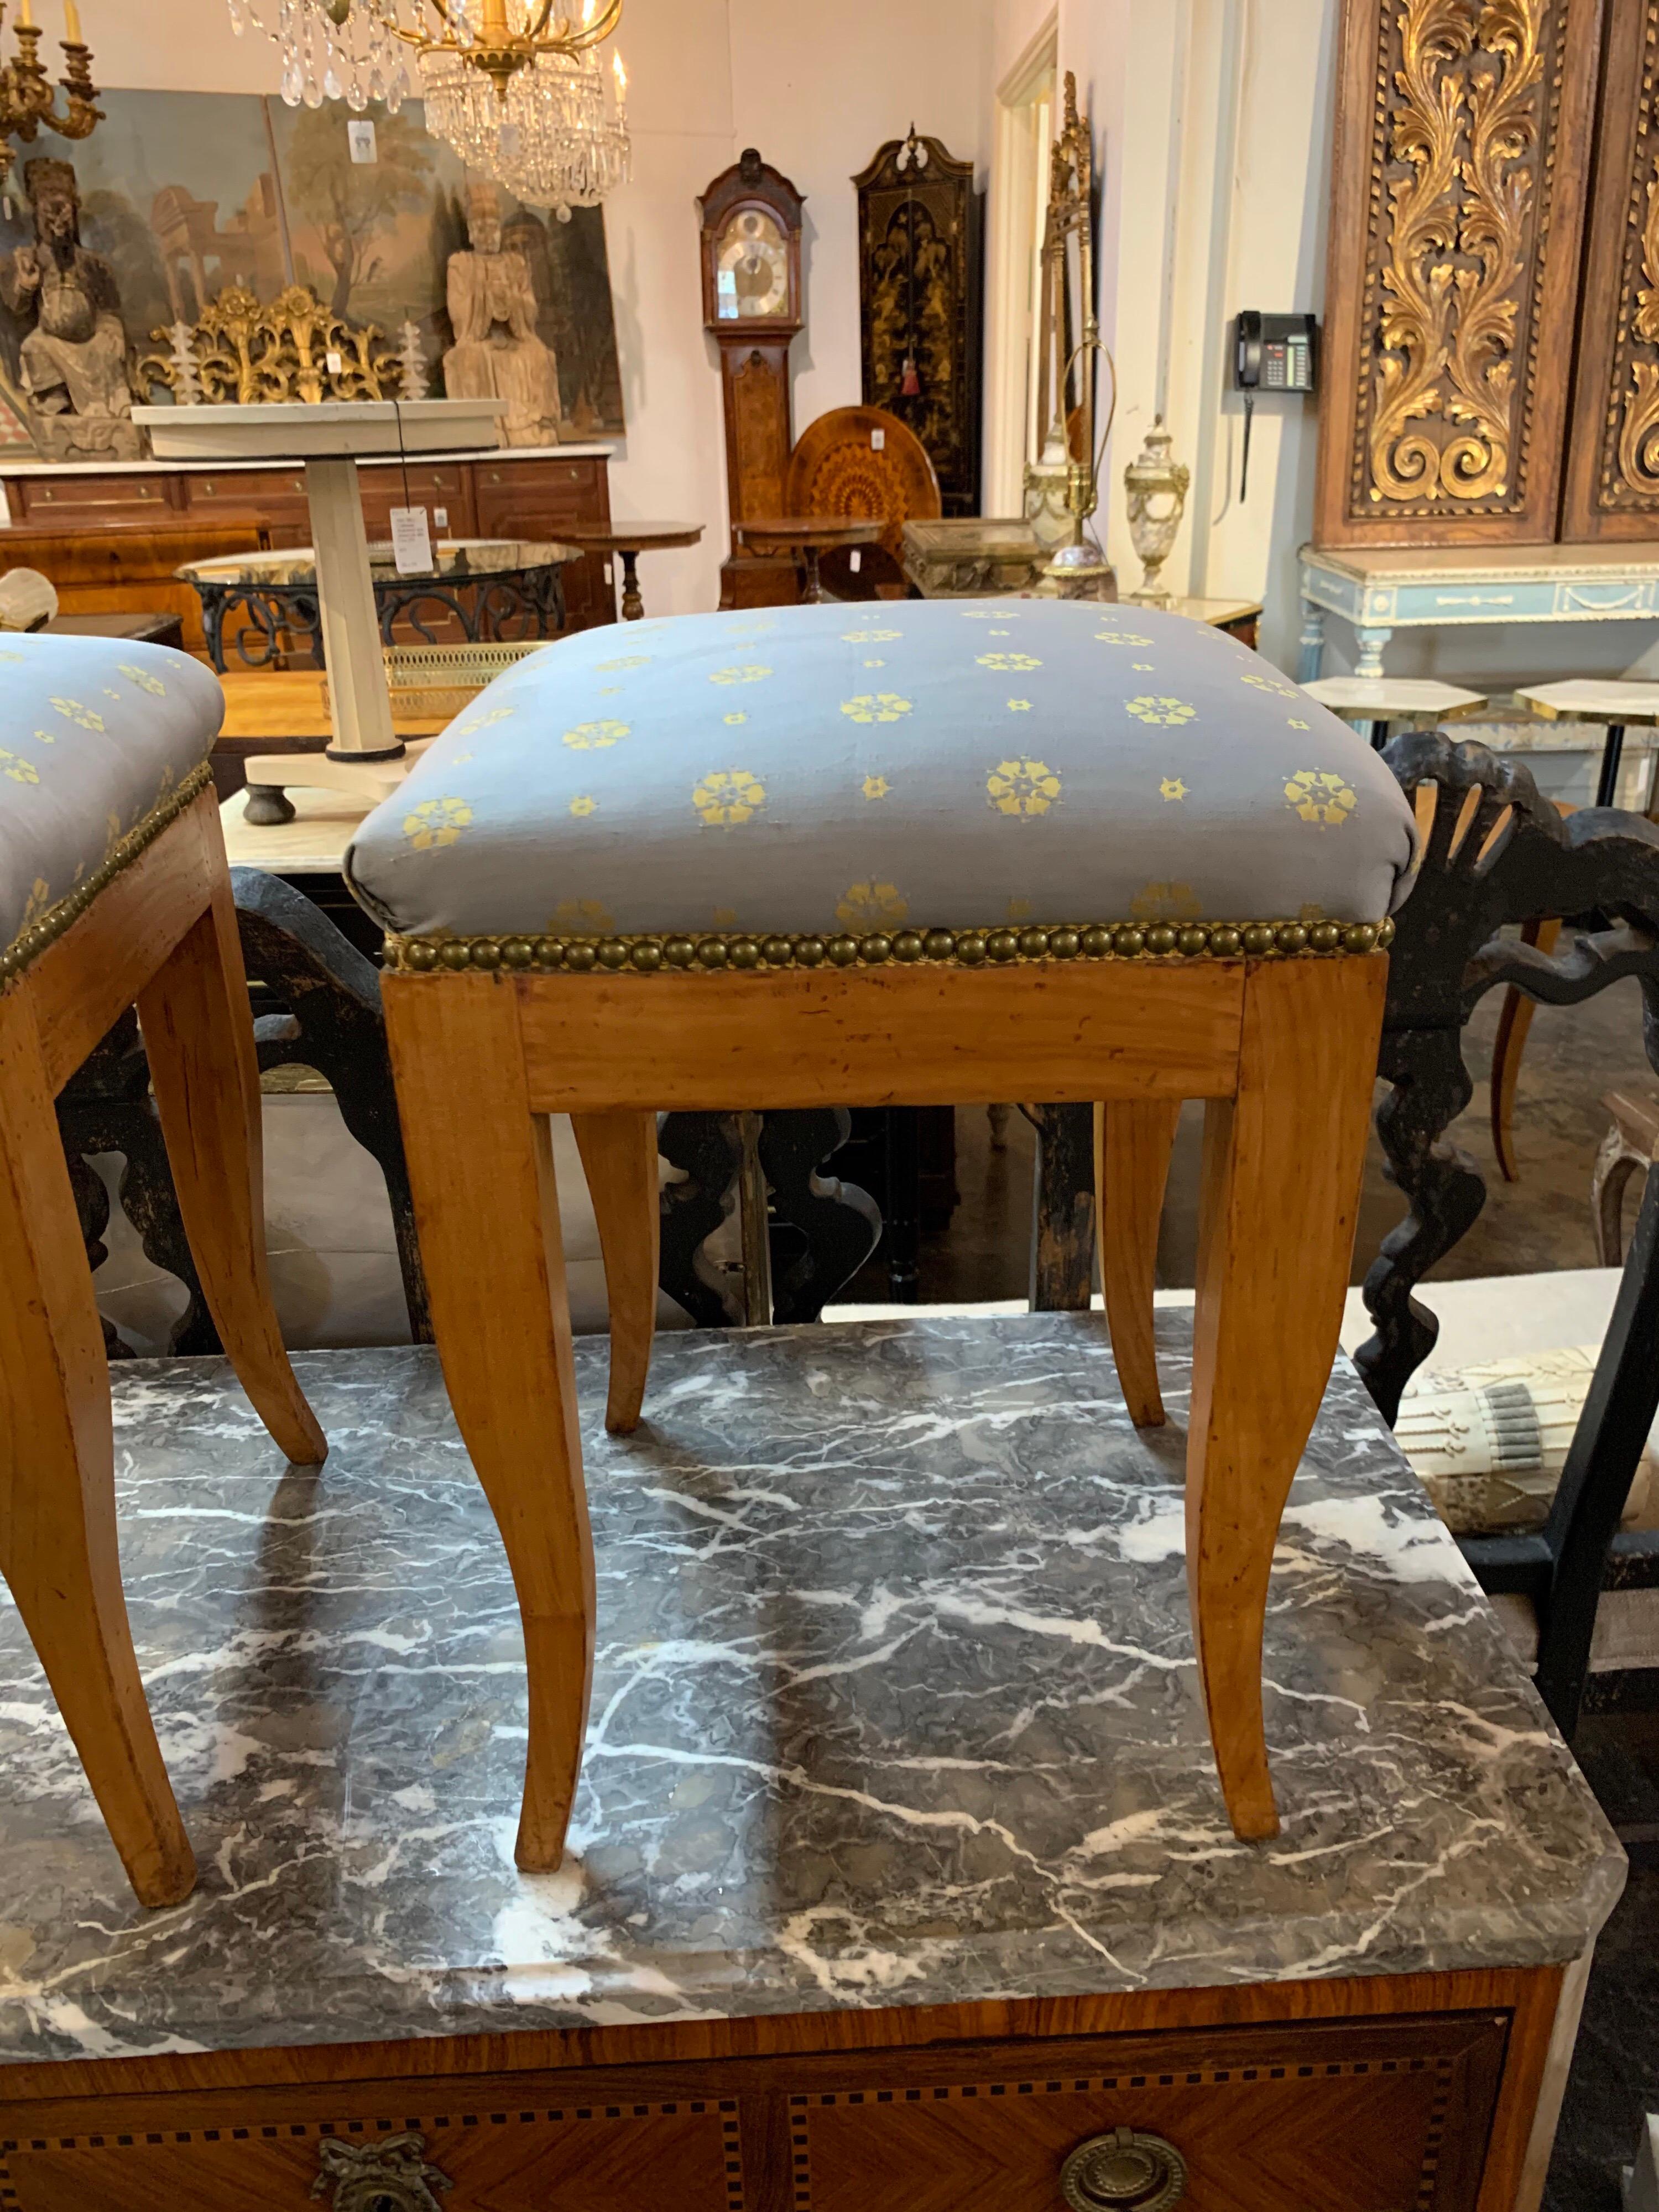 Lovely continental fruitwood Biedermeier style stools. Upholstered in a beautiful grey and gold fabric. Very nice accessory for an elegant home! Note: Price listed is per item.